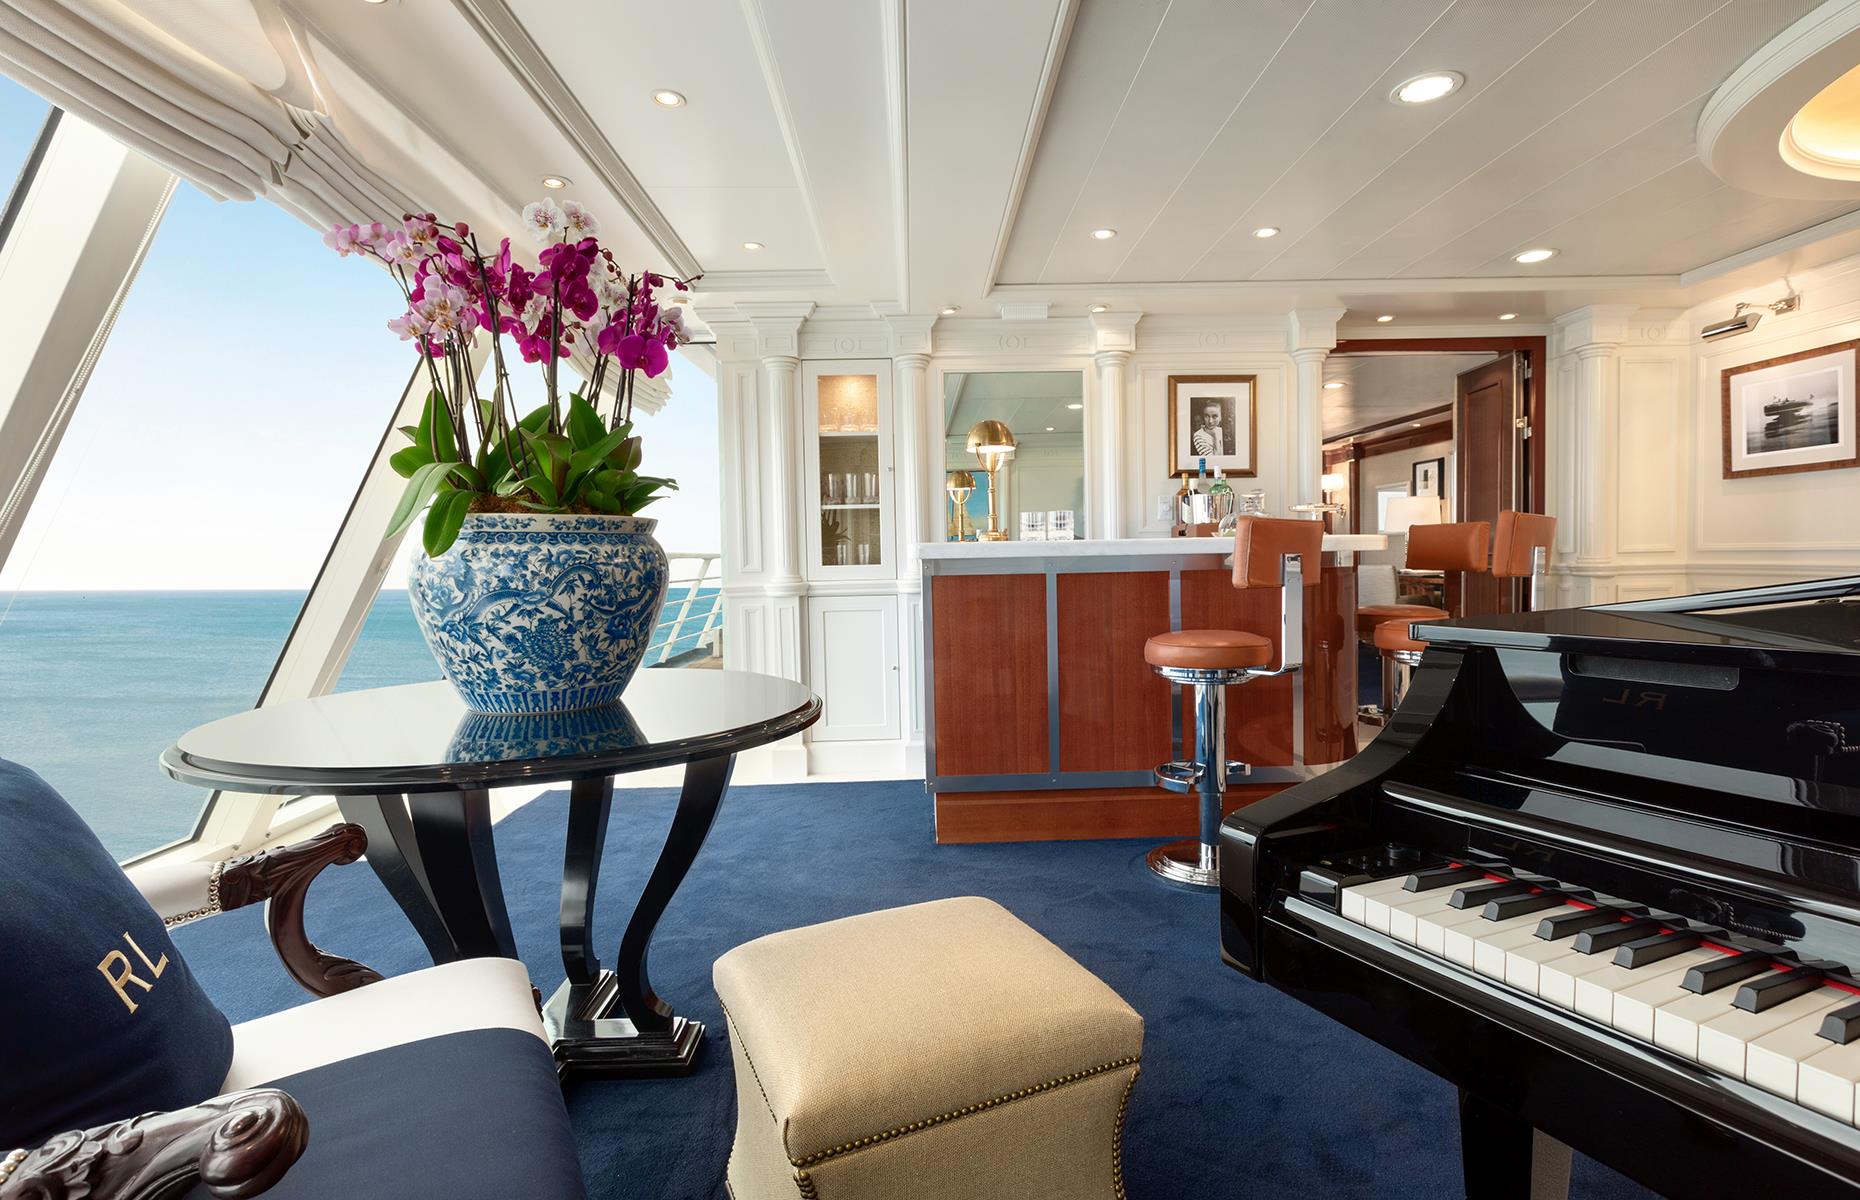 <p>No expense has been spared when it comes to suite decor on luxury ships. For ultimate opulence, opt for the Owner’s suites which you’ll find on <a href="https://www.oceaniacruises.com/?s=PS_NEO_BD_BRA_GOO_NA_SRH_BRANDCORE_oceania%20cruises_NA_UK_NA_700000002135099-71700000078259454-58700006604026348-oceania+cruises&customer_id=305-710-7891&gclid=CjwKCAiAzp6eBhByEiwA_gGq5Na3sR4Z9wE6_4XQu9N959pFRXBuOsBSfeEbnGTiK0-FvBbIbhgCvRoCaTsQAvD_BwE&gclsrc=aw.ds">Oceania Cruises</a>' ships. These cover 1,991 square feet (185sqm), have two walk-in closets and entrance foyers with a grand piano and a mahogany bar. A 15-day Svalbard & Arctic Passage cruise with accommodation in the Grand Owner’s suite costs from $23,044 per person.</p>